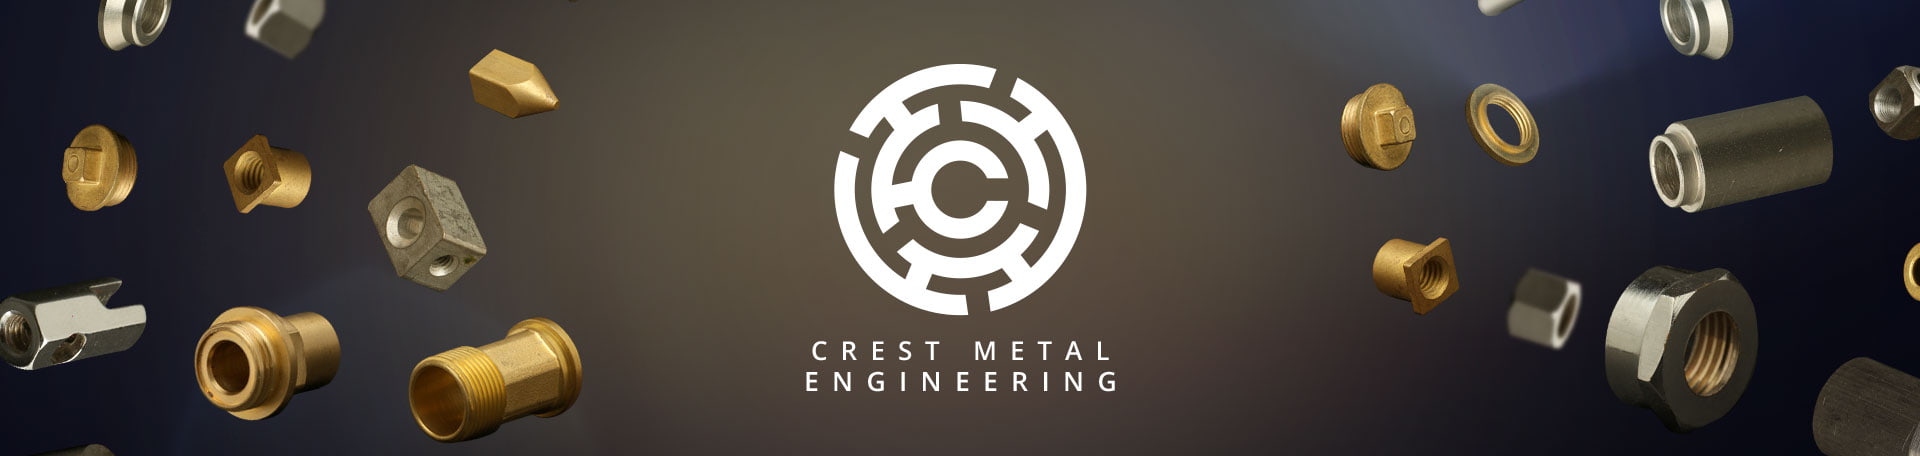 Case Study of Crest Metal Engineering by a Brand Management Agency.